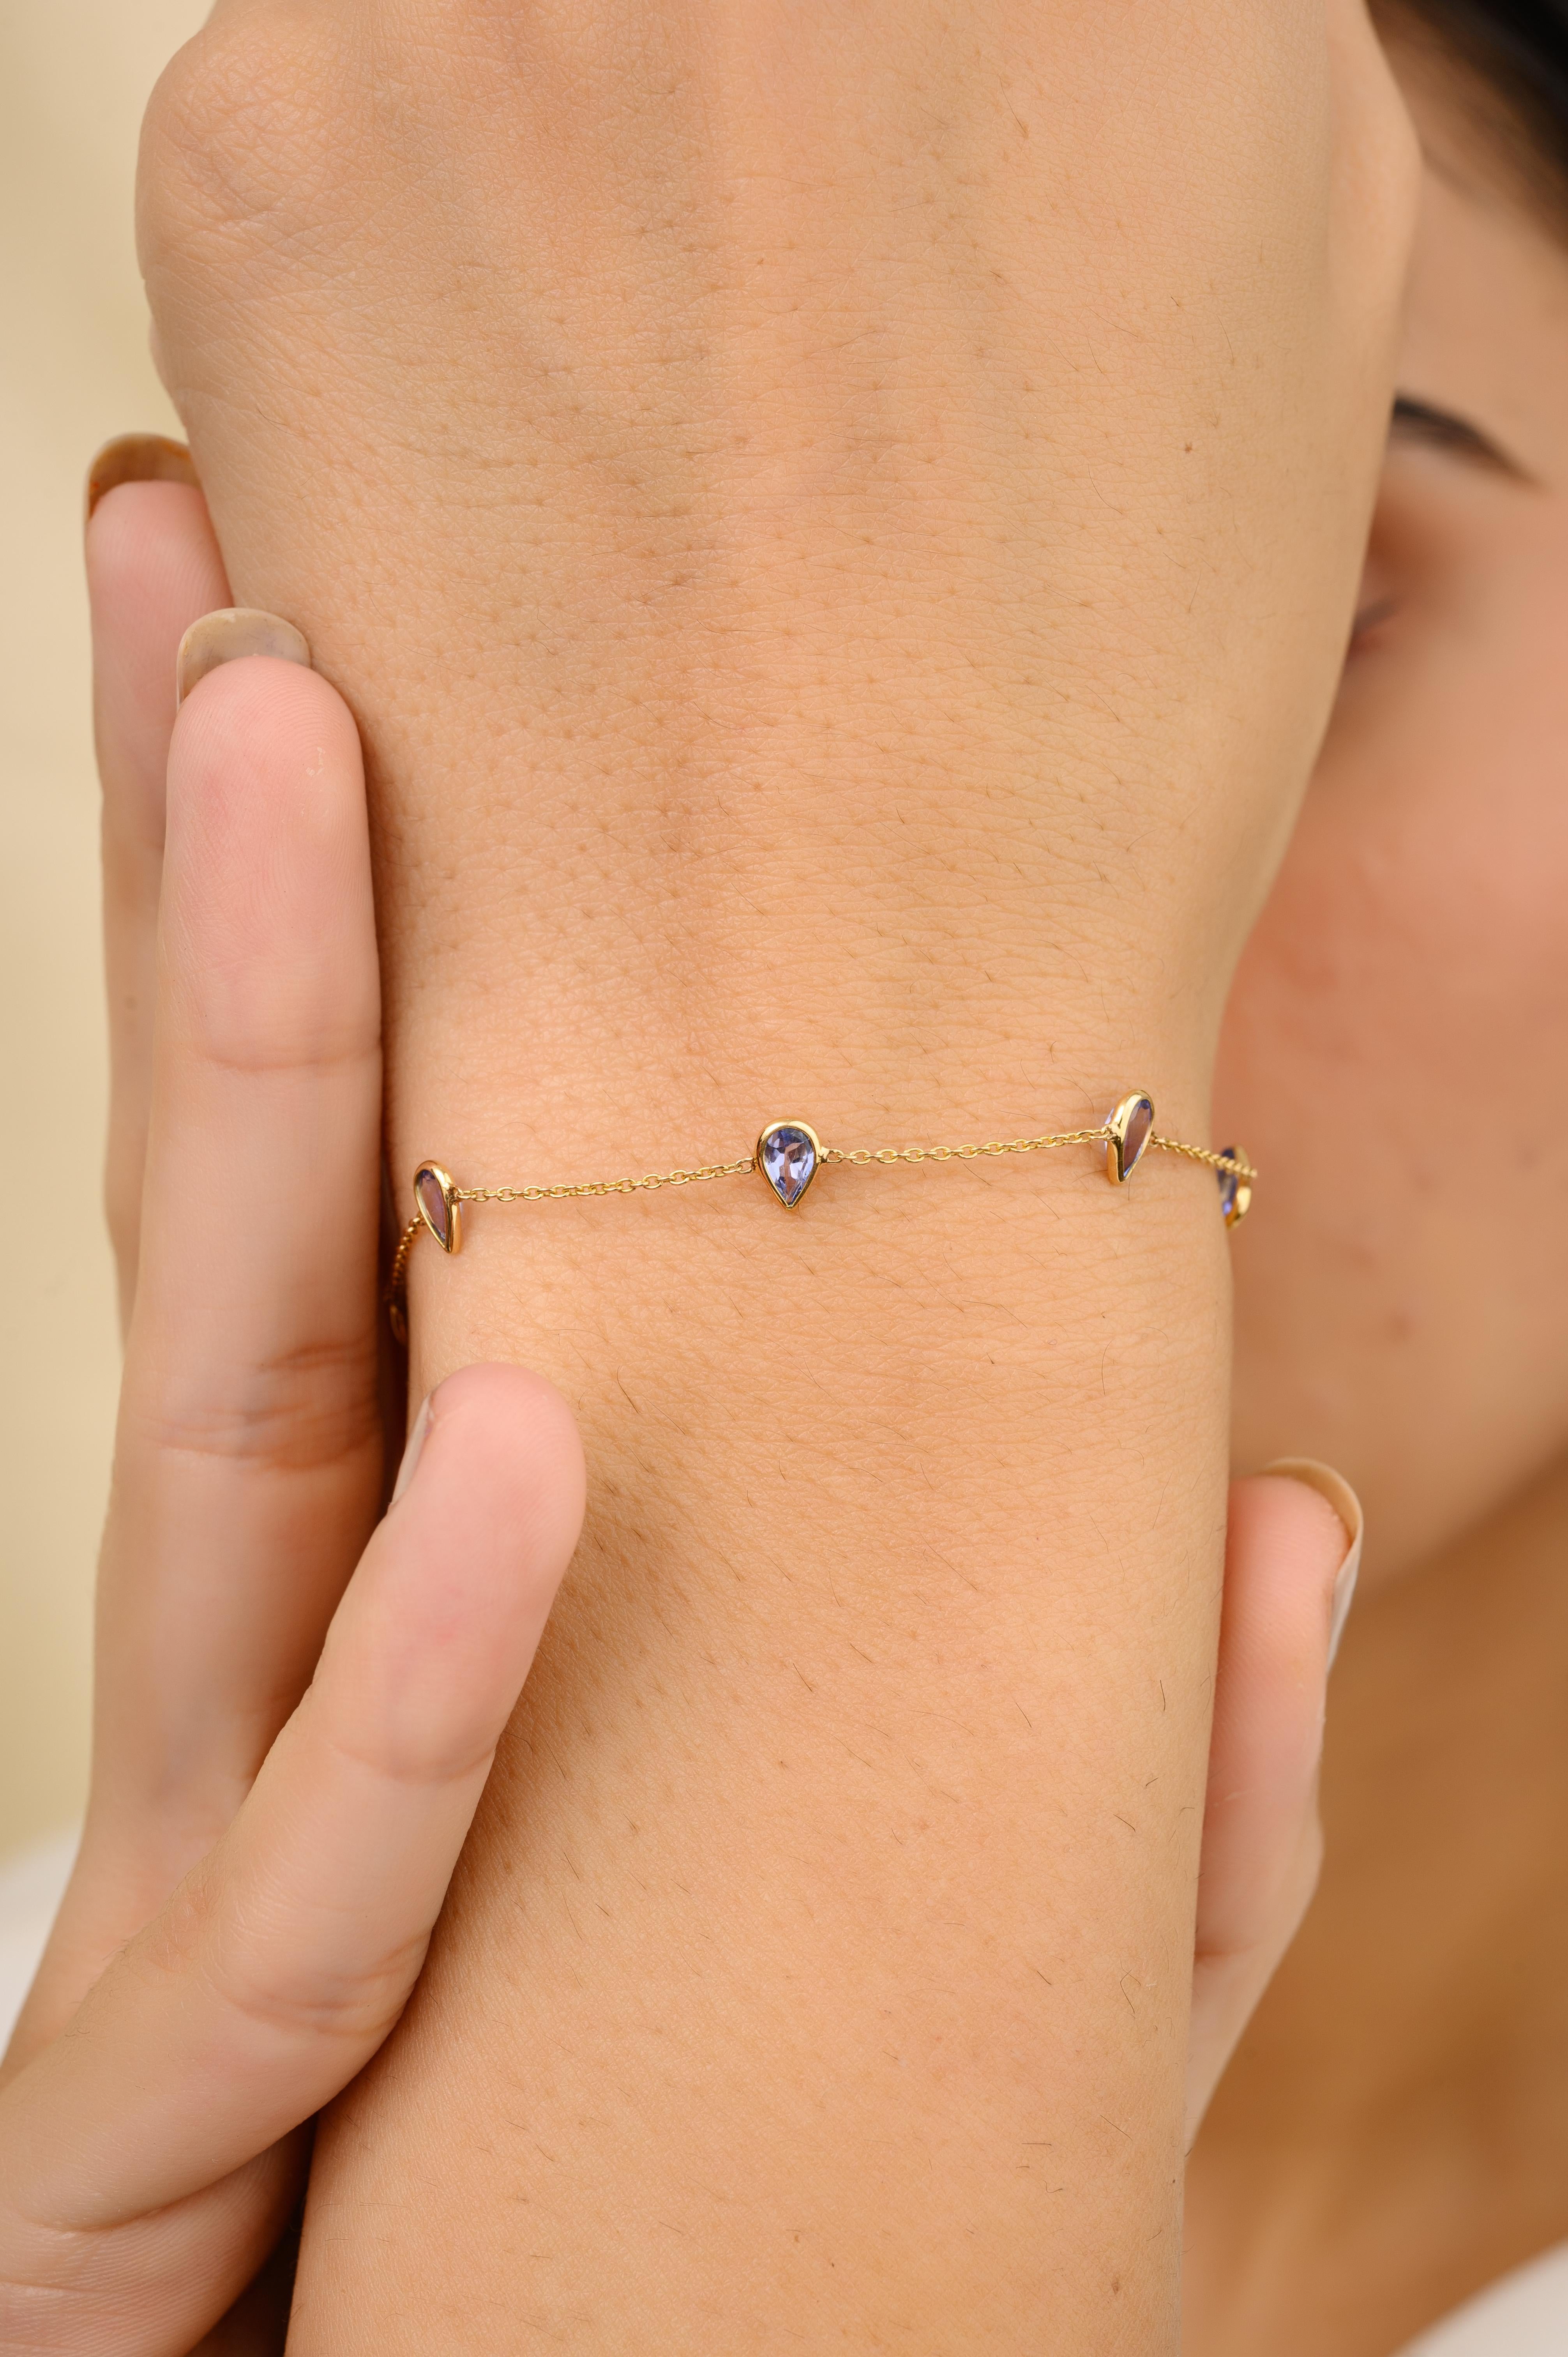 Pear Cut Handmade Tanzanite Gemstone 18K Yellow Gold Chain Bracelet Gift For Her For Sale